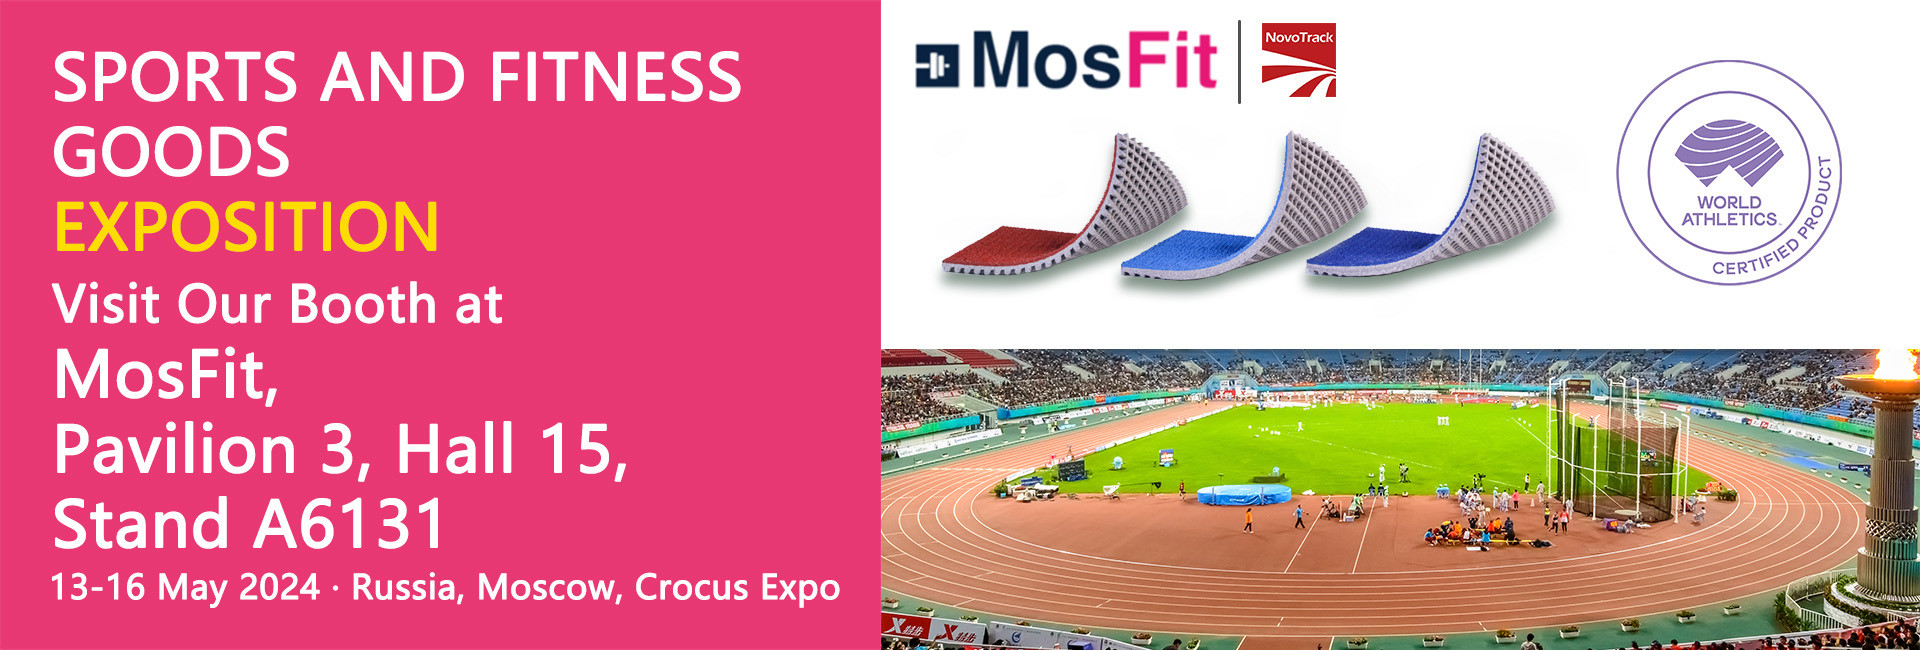 Sports and Fitness Goods Exposition MosFit NovoTrack